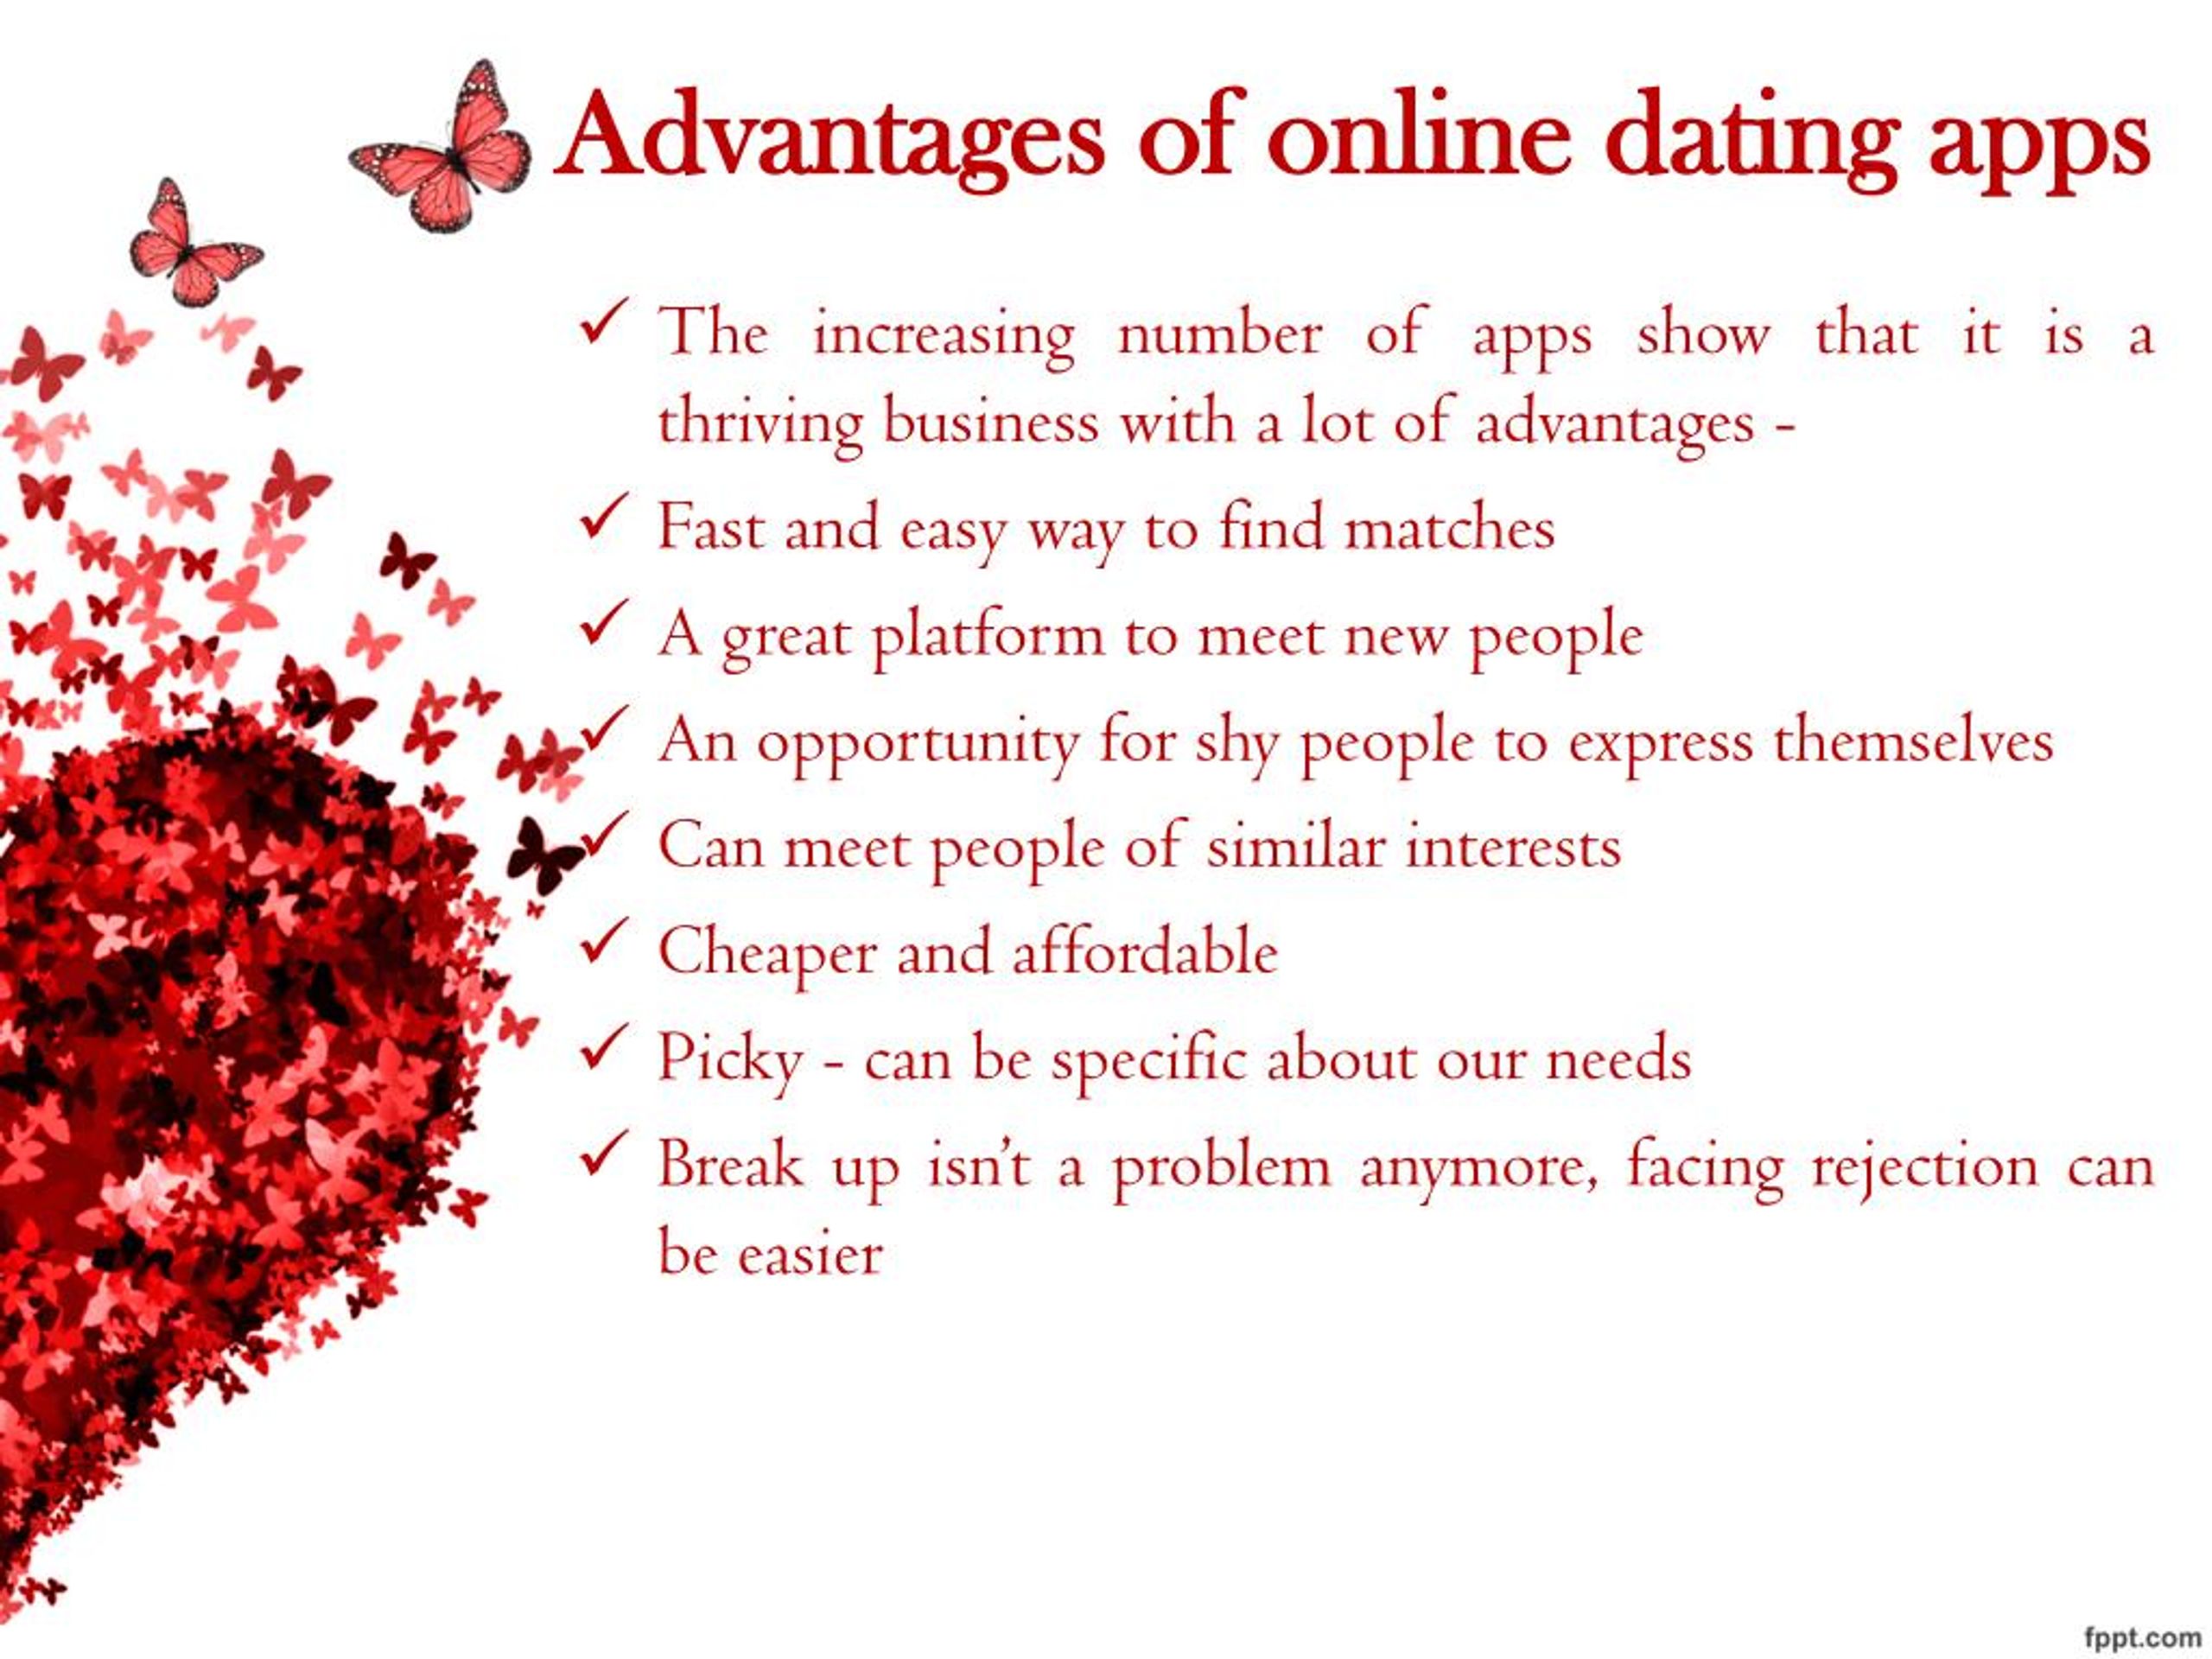 The Pros and Cons of Online Dating | Psychology Talk 5 - YouTube